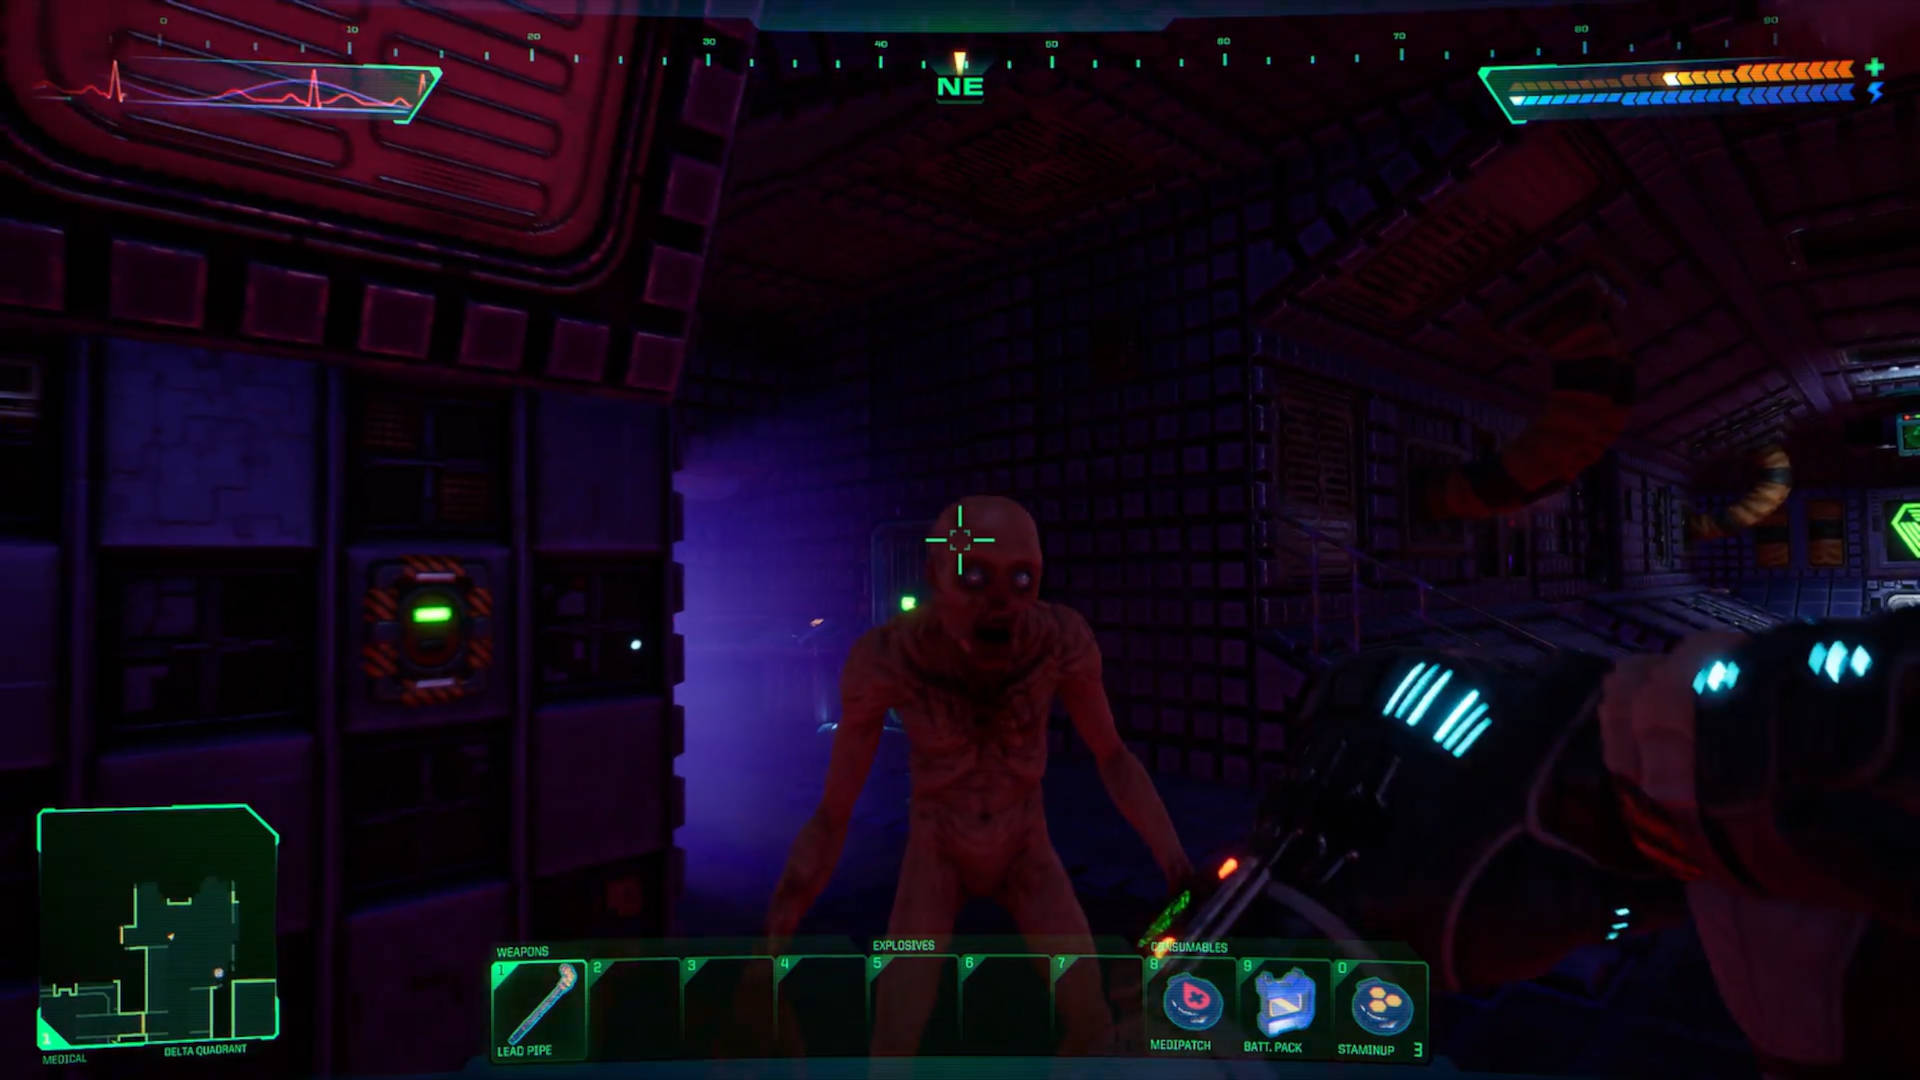 System Shock review - a very dark room where the Hacker is about to shoot a zombie mutant. This image is intentionally left dark.